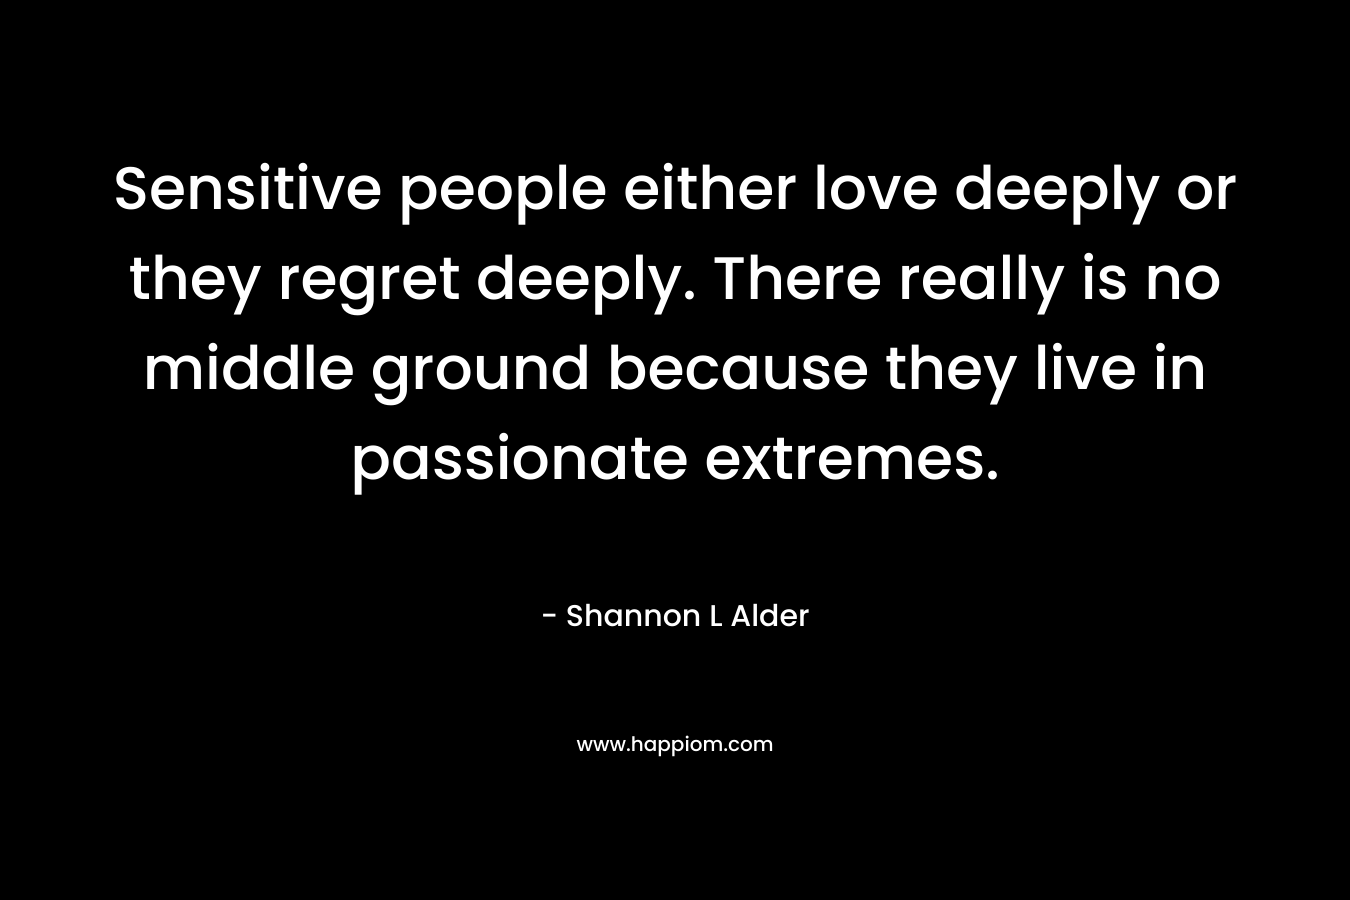 Sensitive people either love deeply or they regret deeply. There really is no middle ground because they live in passionate extremes.